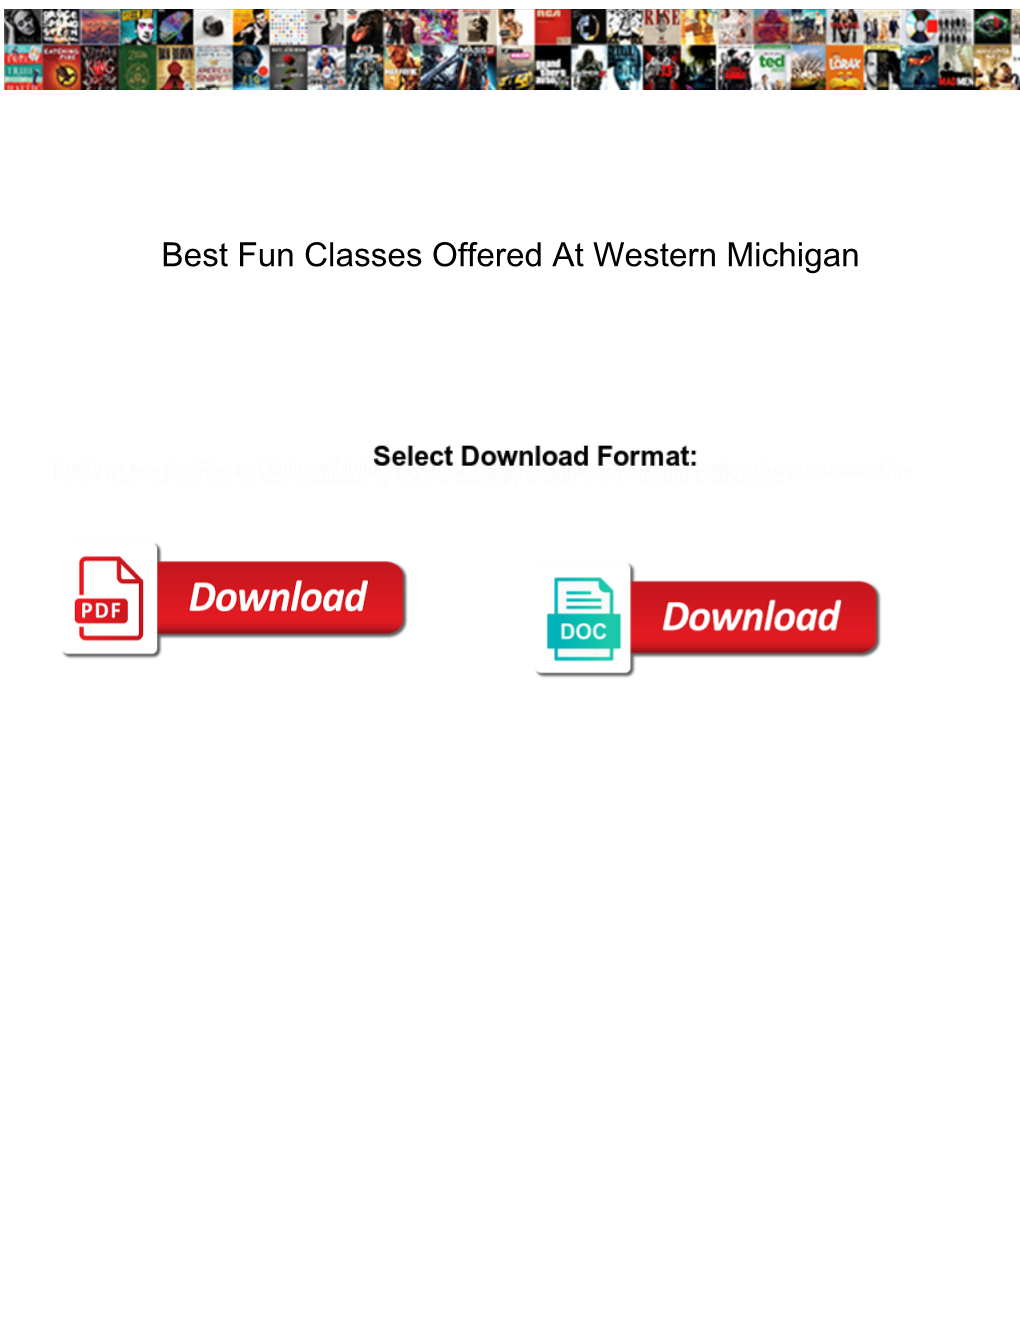 Best Fun Classes Offered at Western Michigan